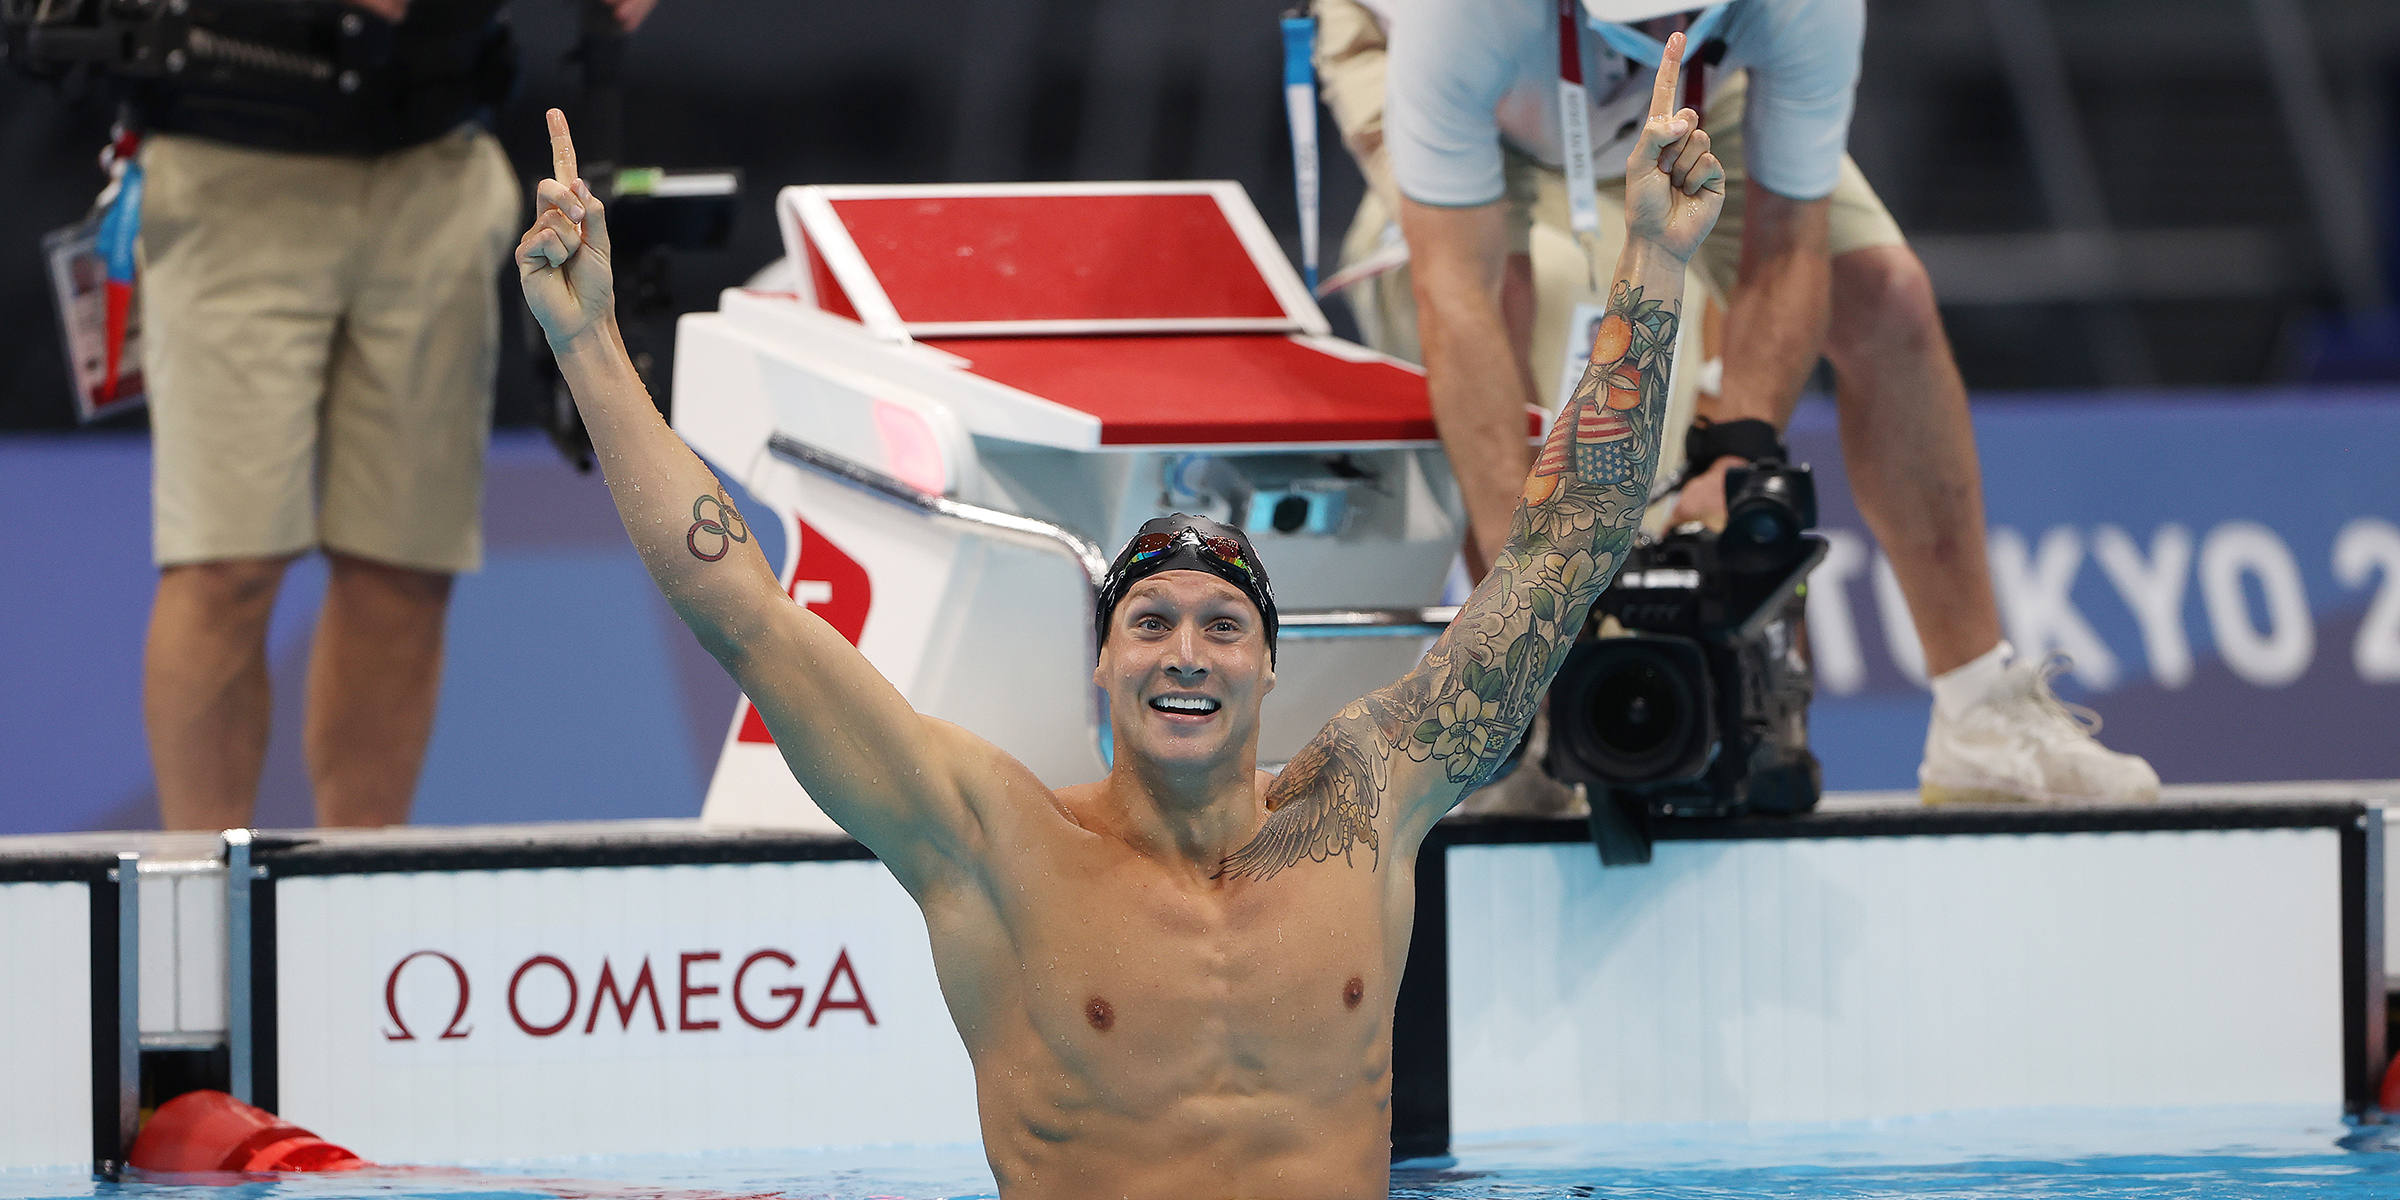 Swimmer Caeleb Dressel tears up after family's epic reaction to his gold medal